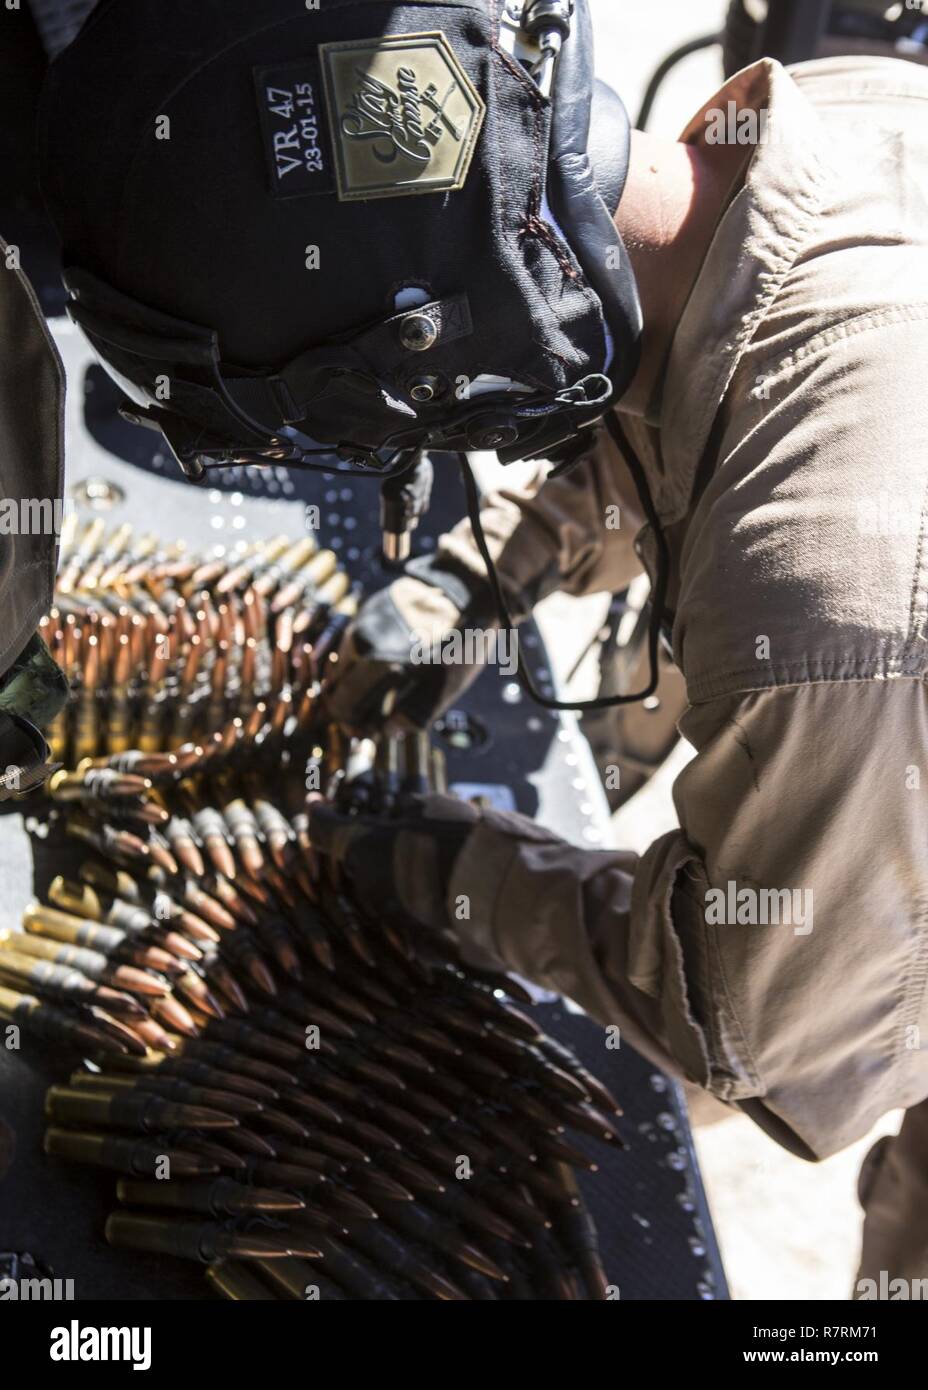 U.S. Marine Corps Sgt. Paul Guillen, crew chief with Marine Light Attack Helicopter Squadron-169, restocks his ammo during an aerial gunnery refinement at Weapons and Tactics Instructor Course (WTI) 2-17, at Chocolate Mountain Aerial Gunnery Range, Calif., April 5, 2017. WTI is a seven-week training event hosted by Marine Aviation Weapons and Tactics Squadron One (MAWTS-1) cadre, which emphasizes operational integration of the six functions of Marine Corps aviation in support of a Marine Air Ground Task Force and provides standardized advanced tactical training and certification of unit instru Stock Photo